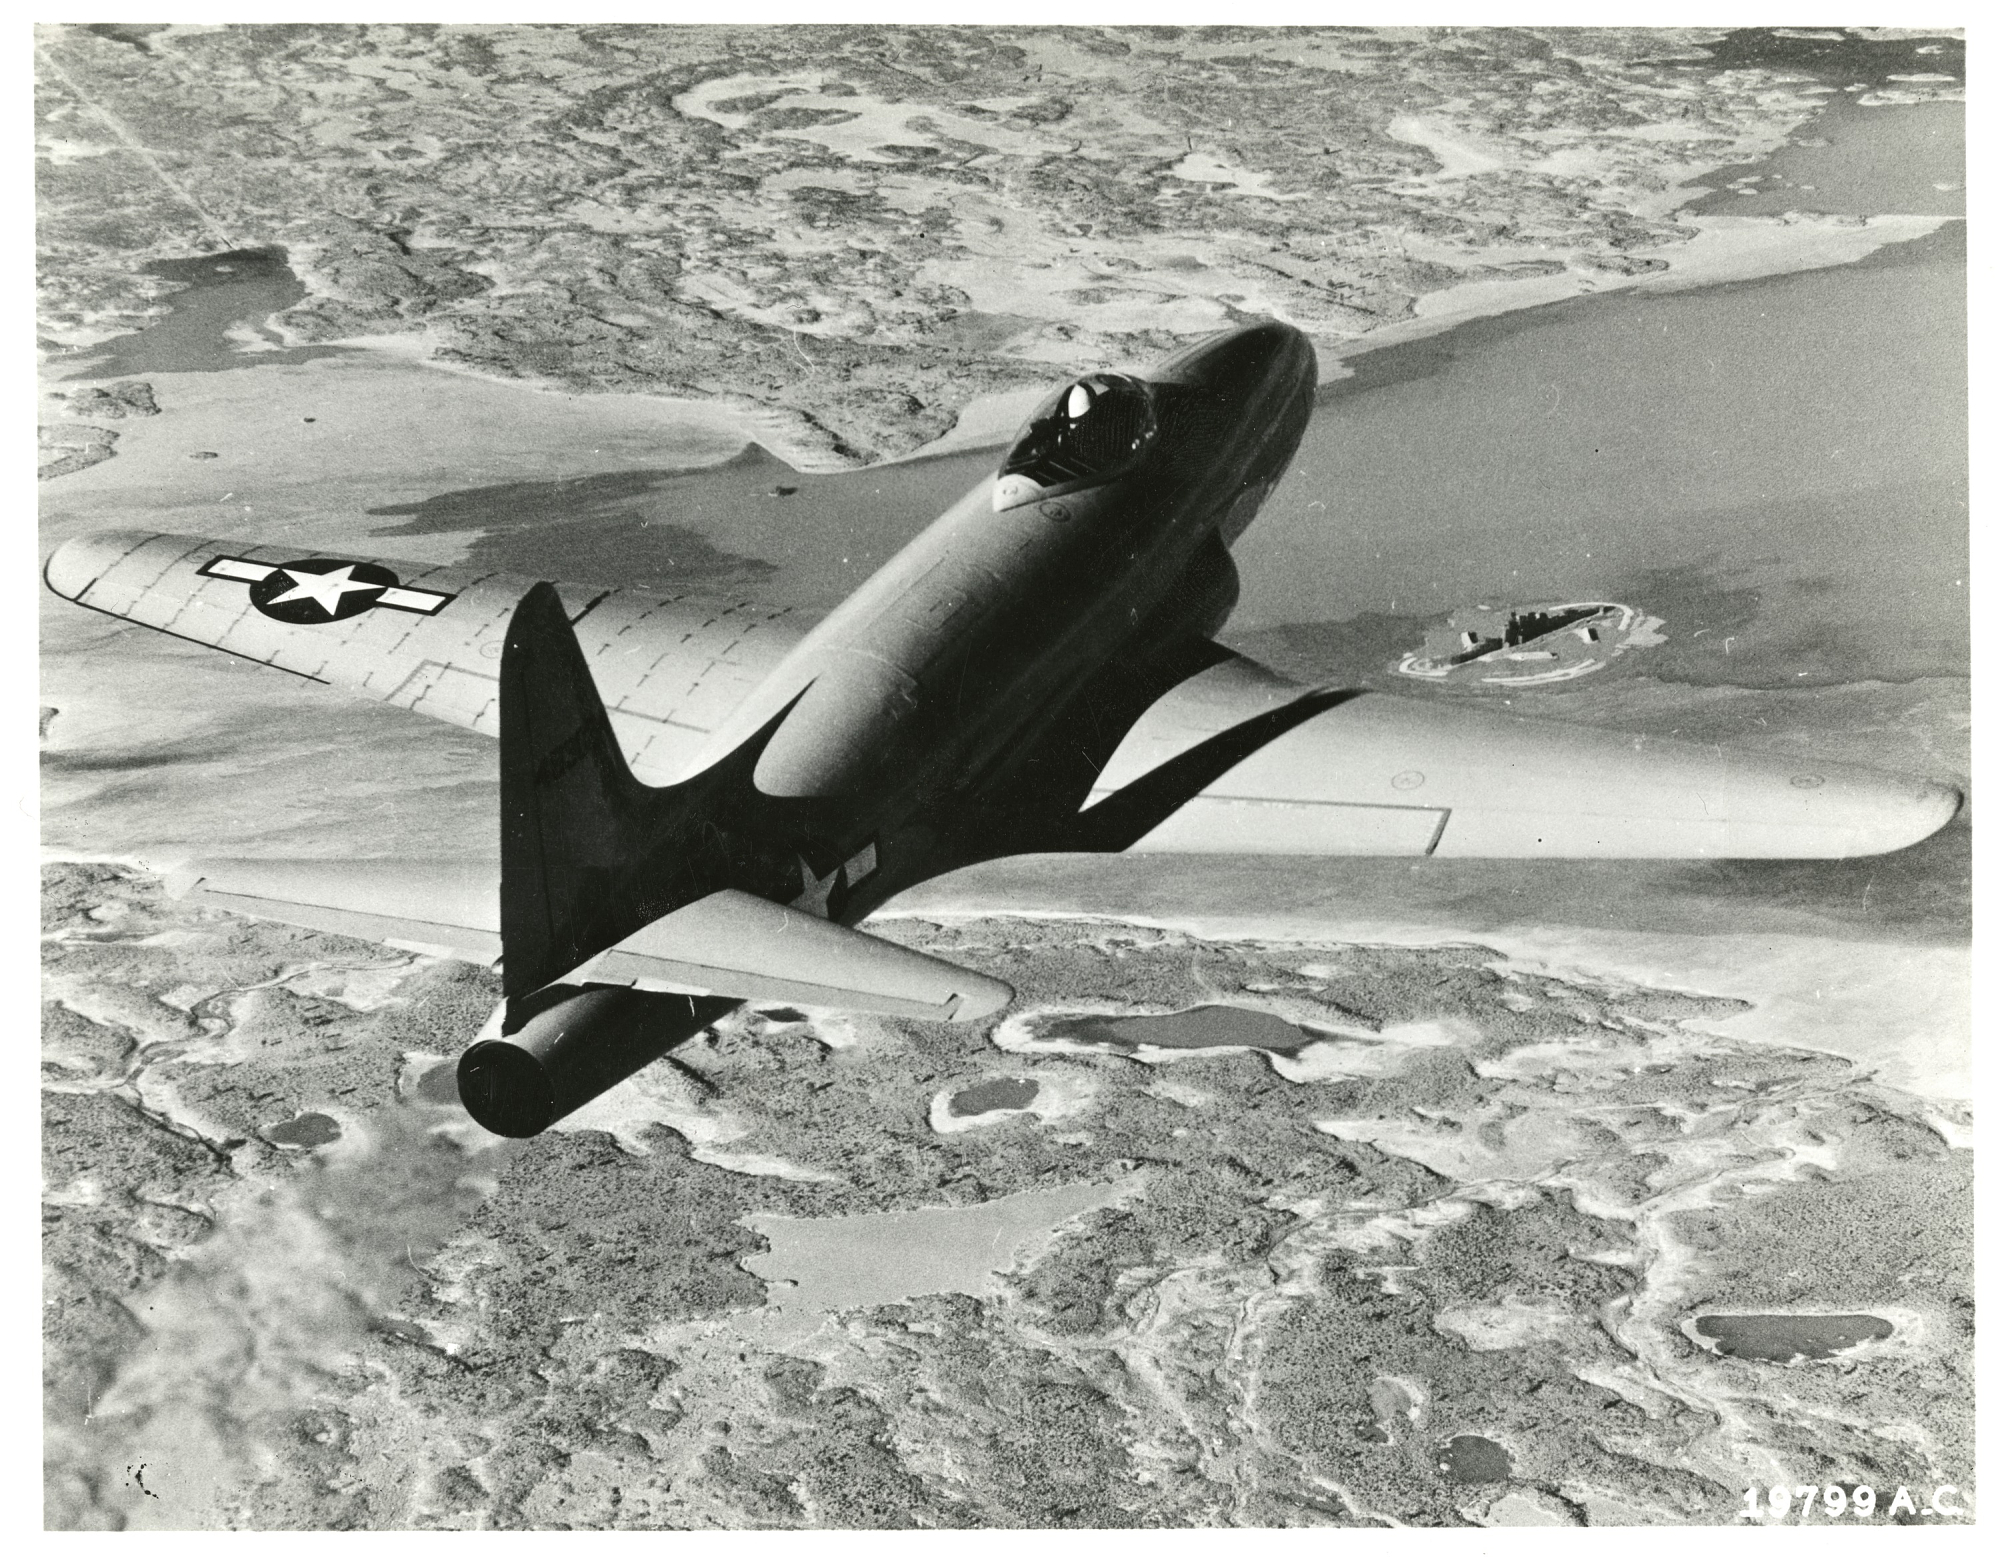 One-half right rear view of the Lockheed XP-80A sn 44-83021 in flight